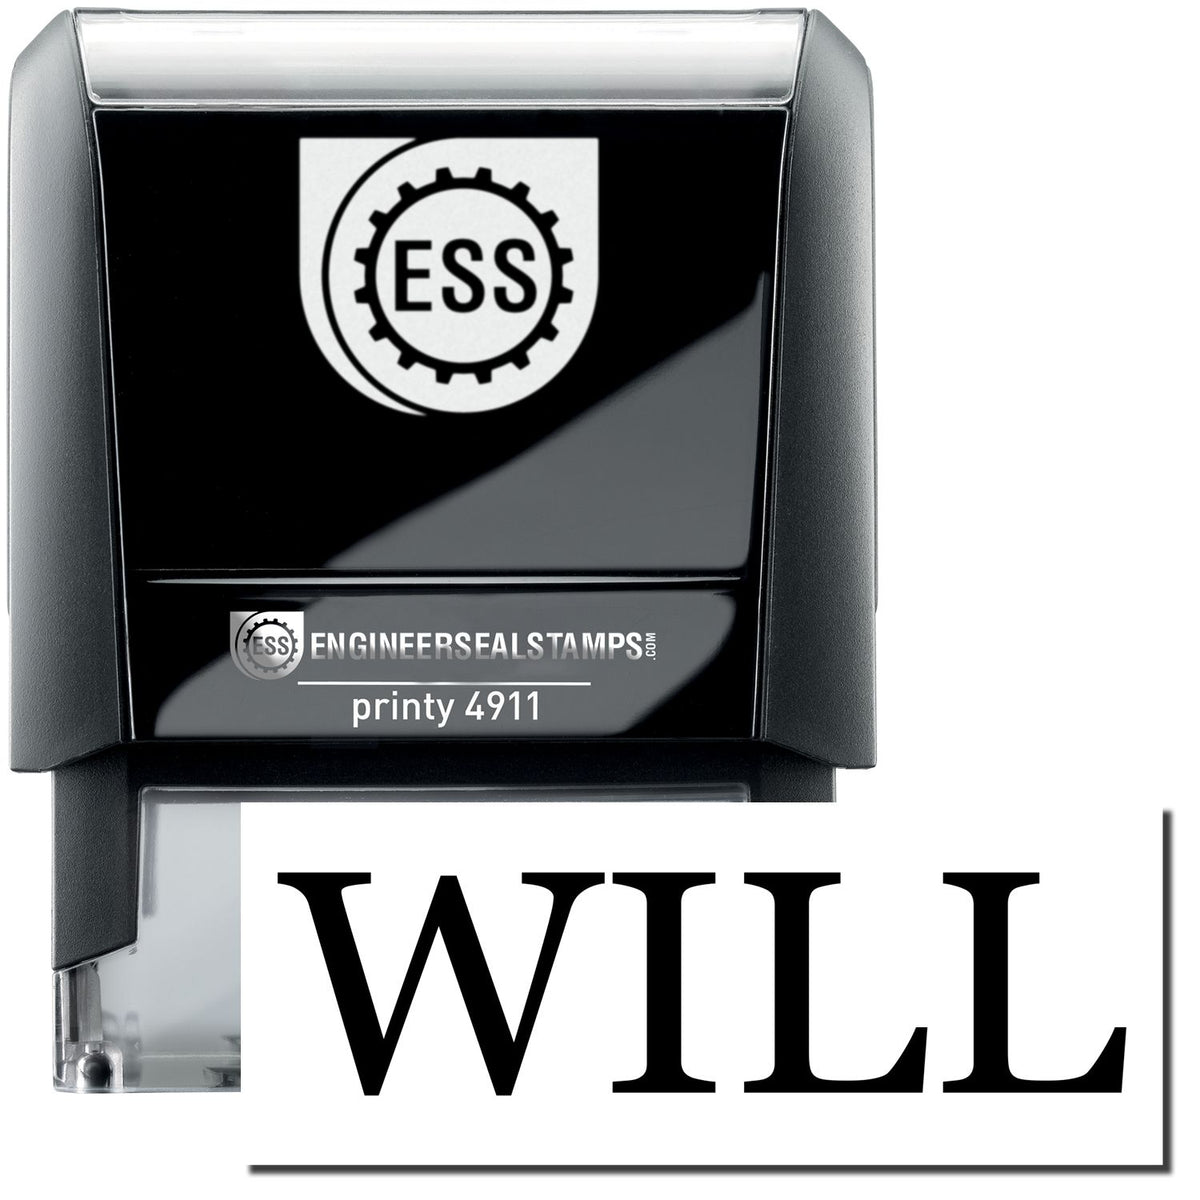 A self-inking stamp with a stamped image showing how the text &quot;WILL&quot; is displayed after stamping.